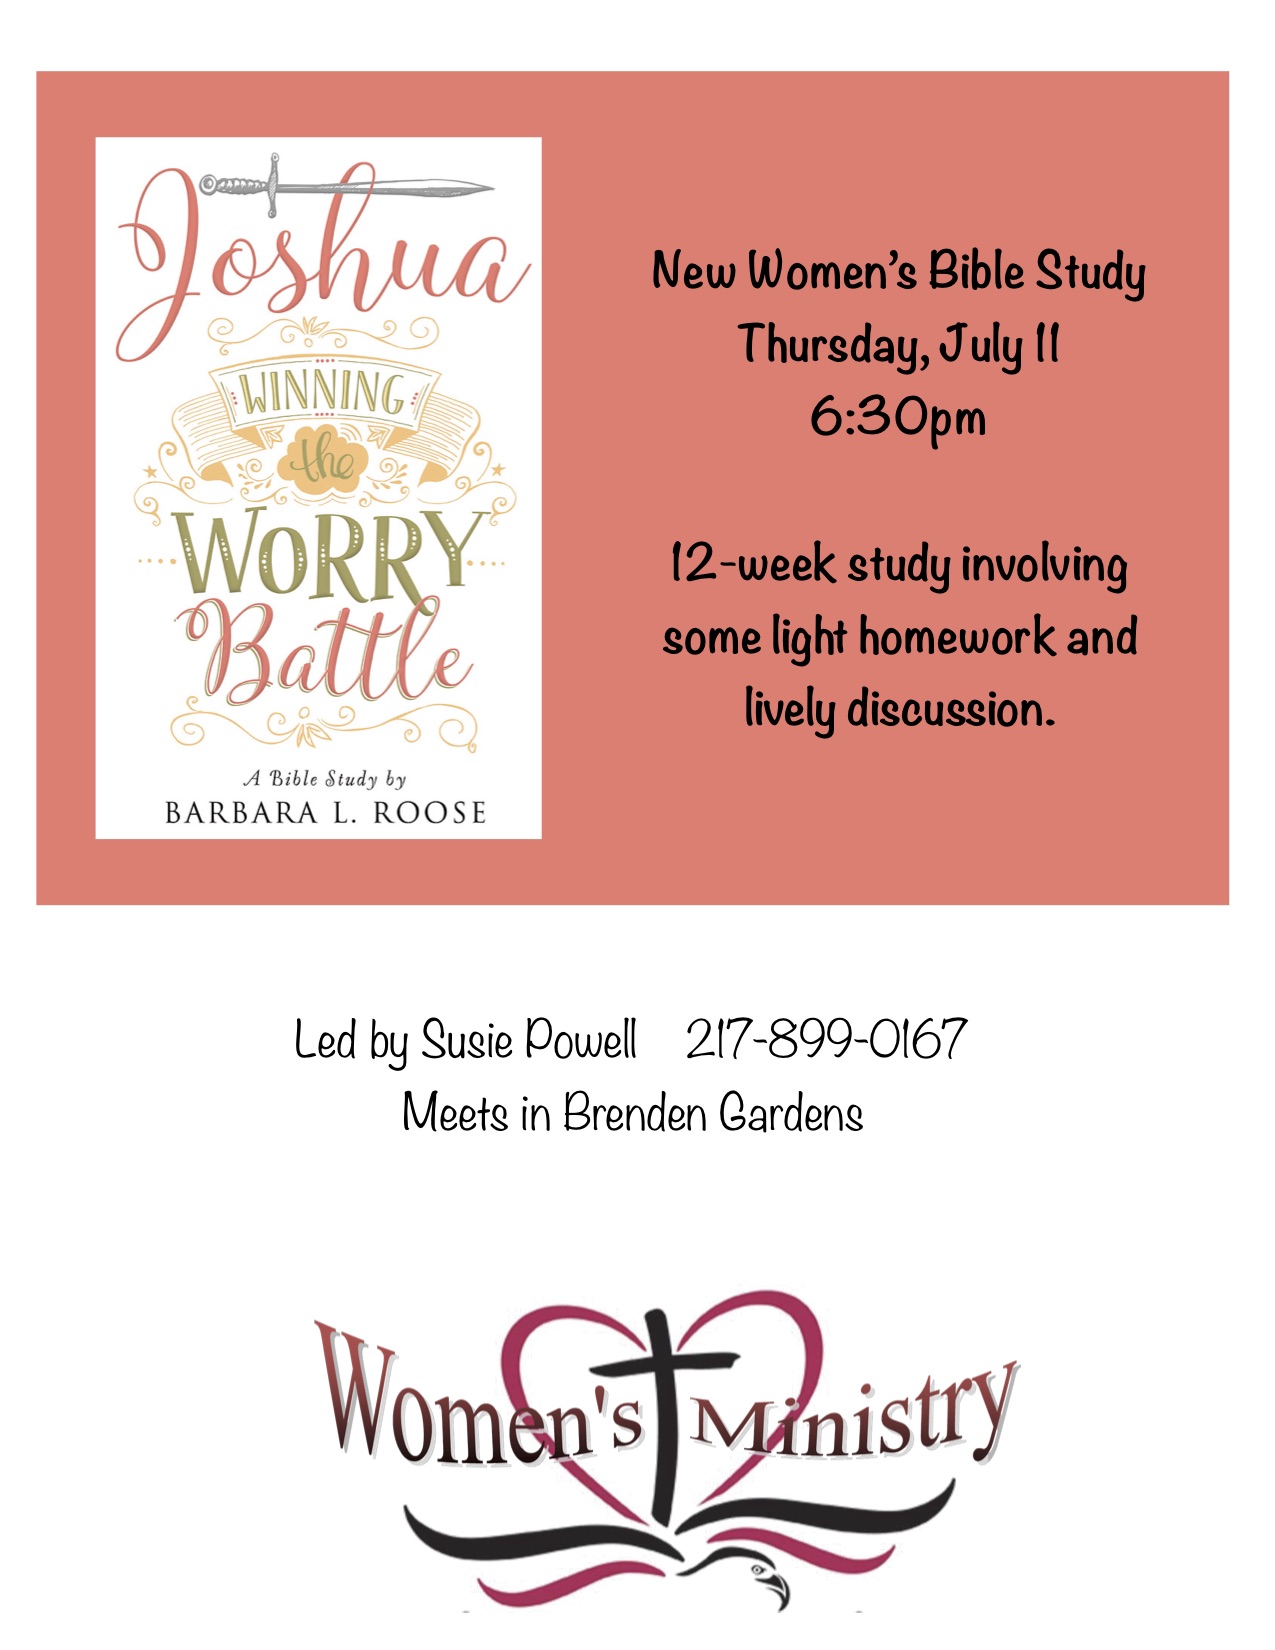 Ladies Bible Study Springfield First